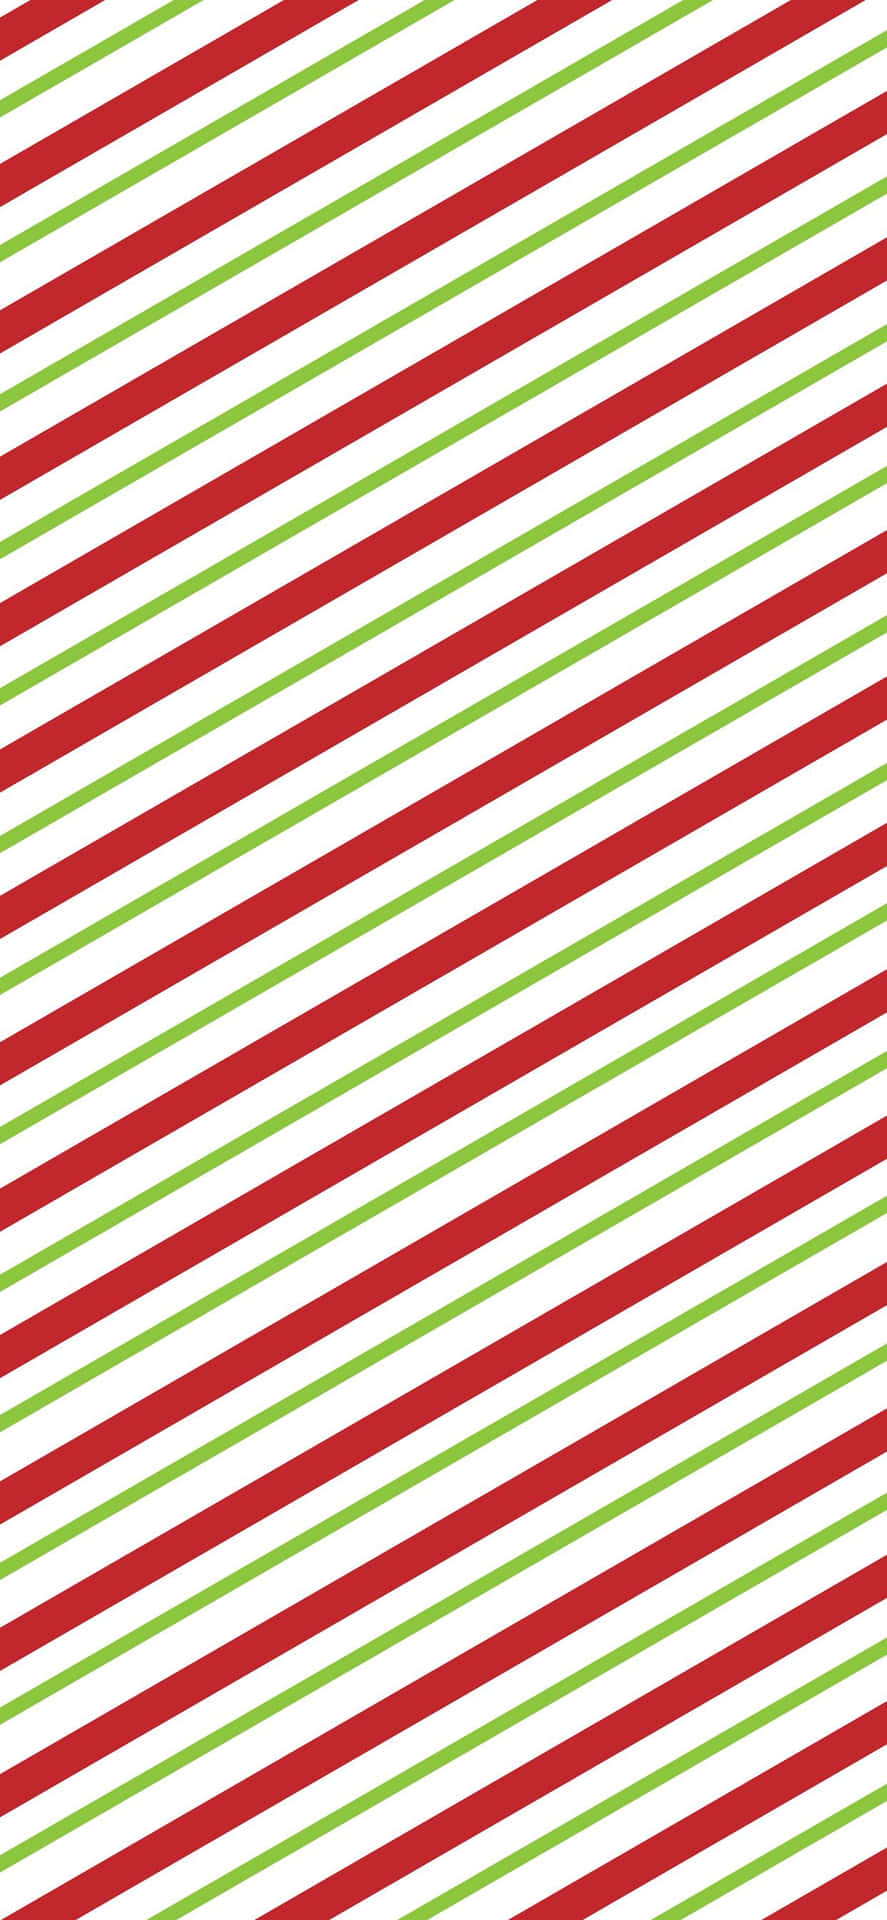 A Christmas Striped Paper With Red And Green Stripes